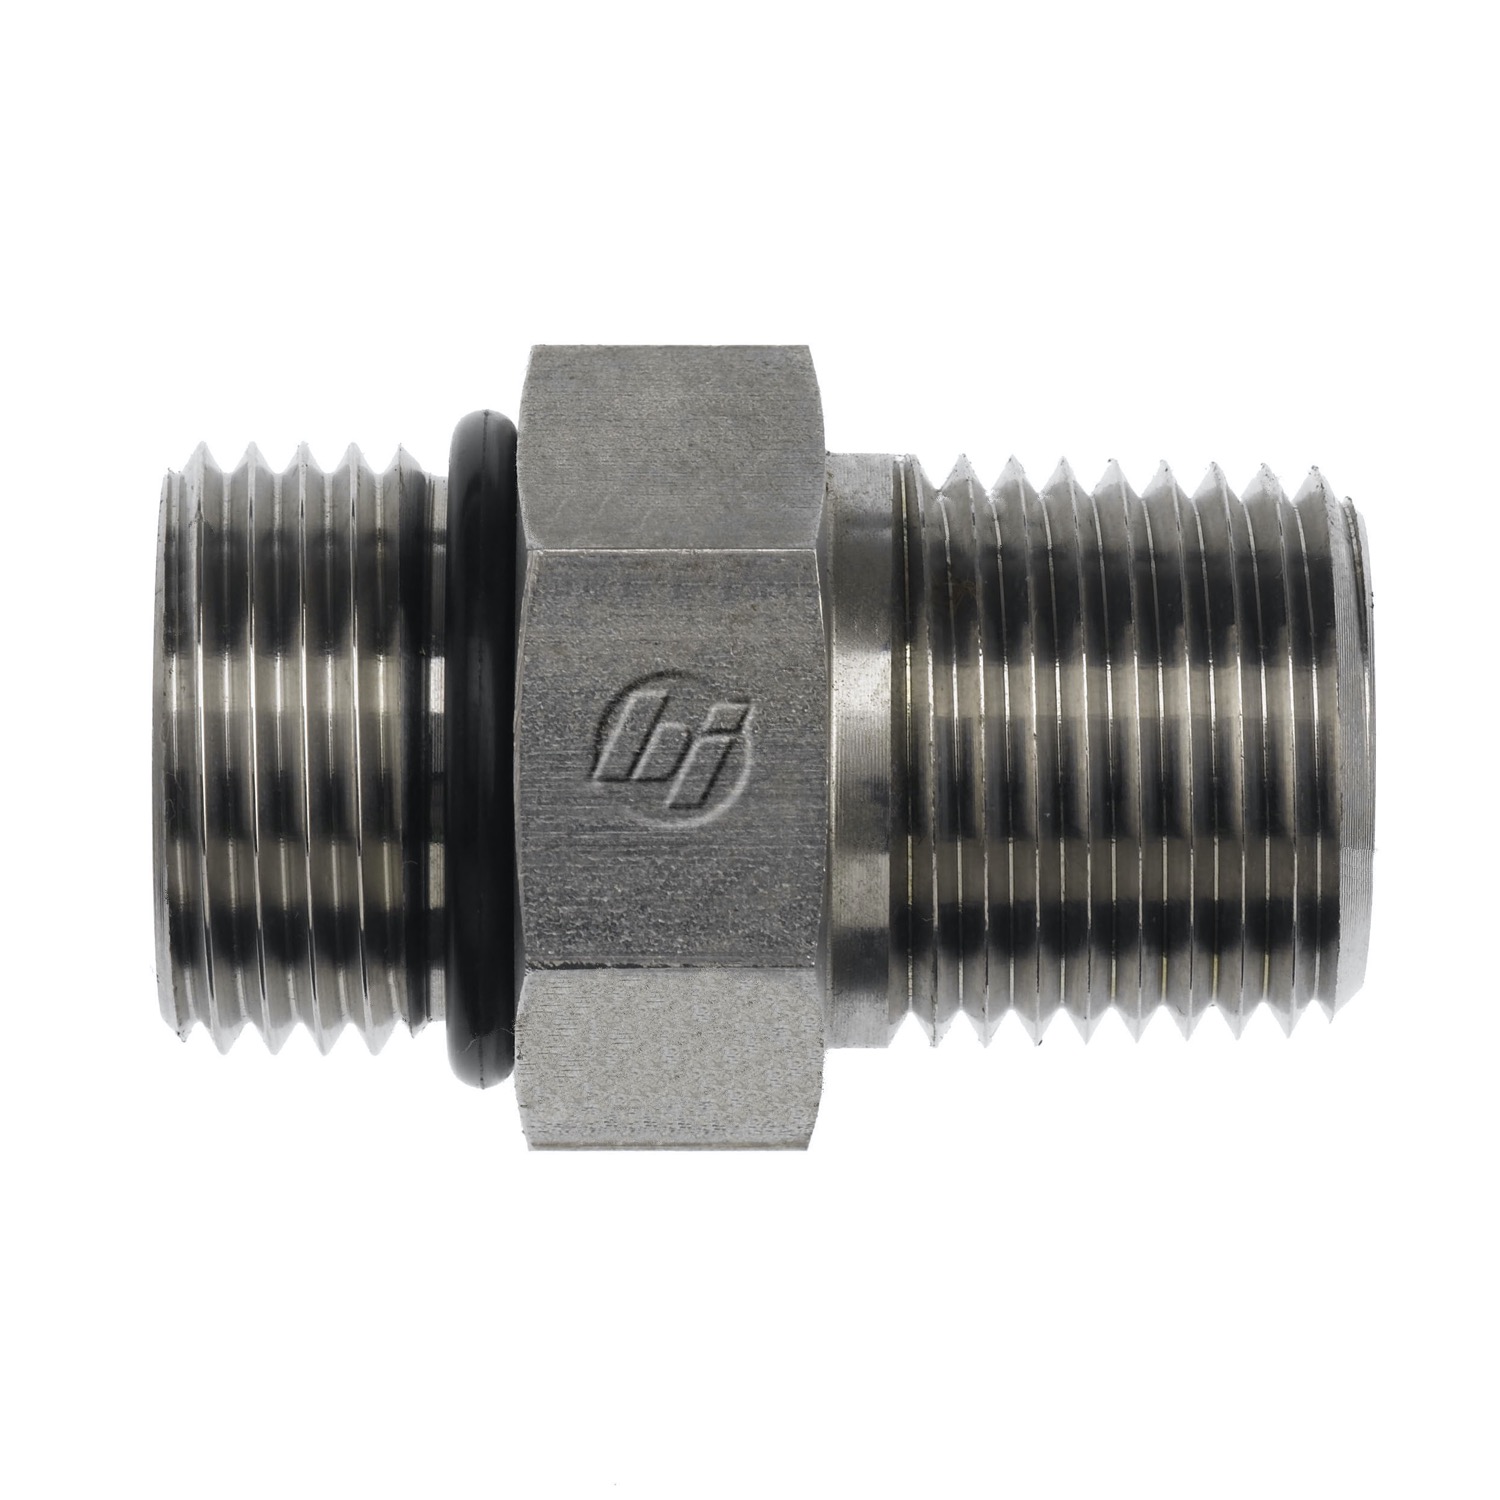 Hydraulic Hose Adapters - Straight Fitting, O-Ring Boss to NPTF, 6401 Series 6401-24-24-O